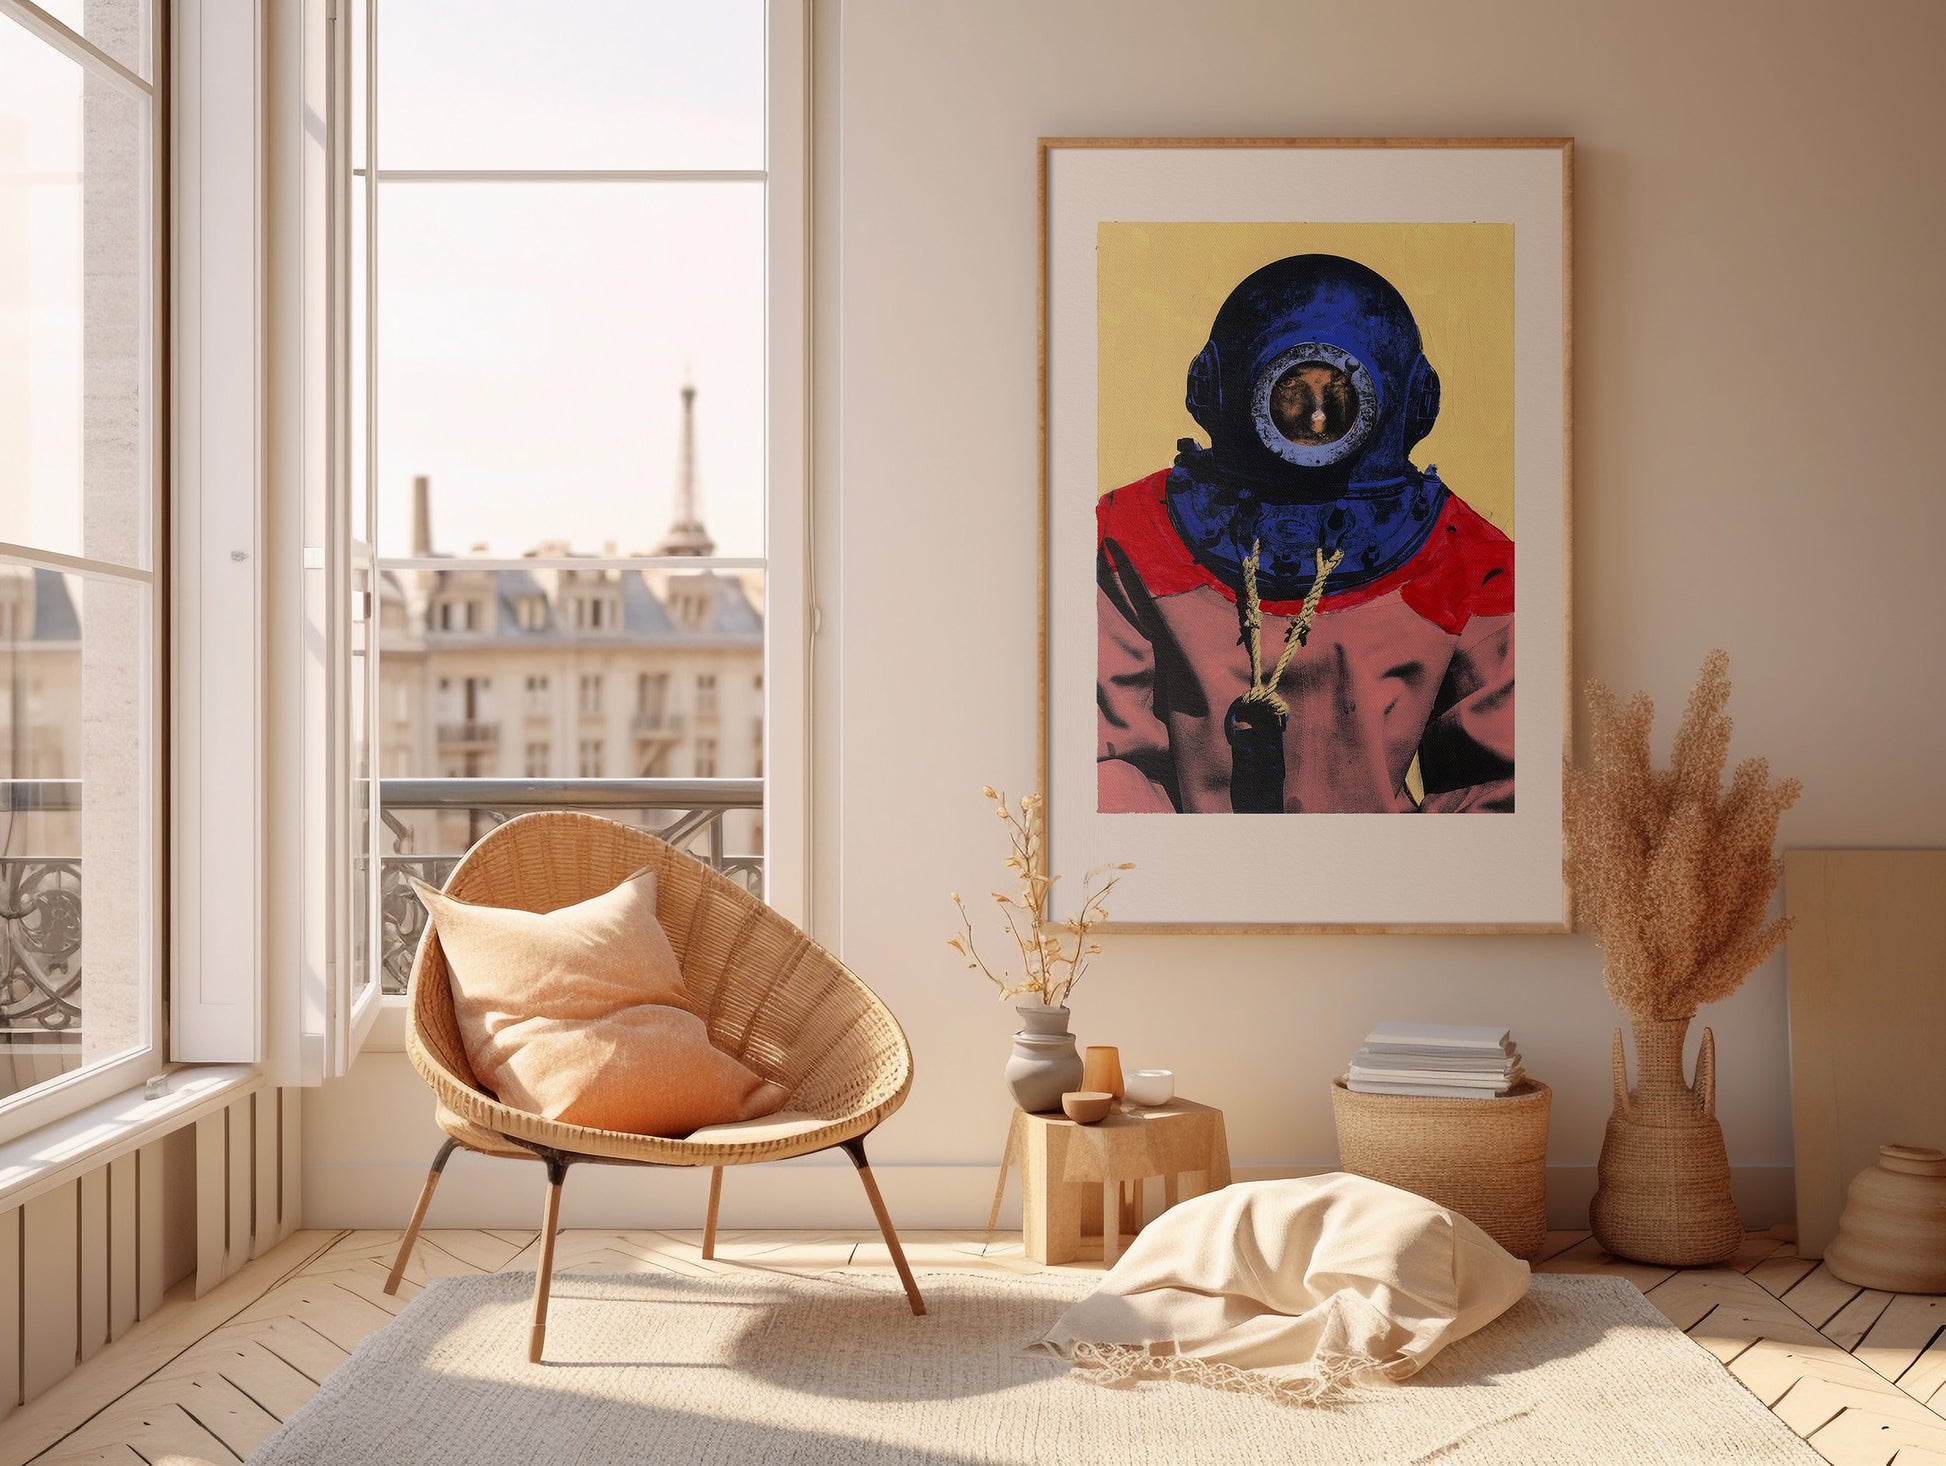 Painting Pop Art Wall Art from Greece | Canary & Blue sponge diver from Kalymnos island, by George Tatakis - inside a room in Paris